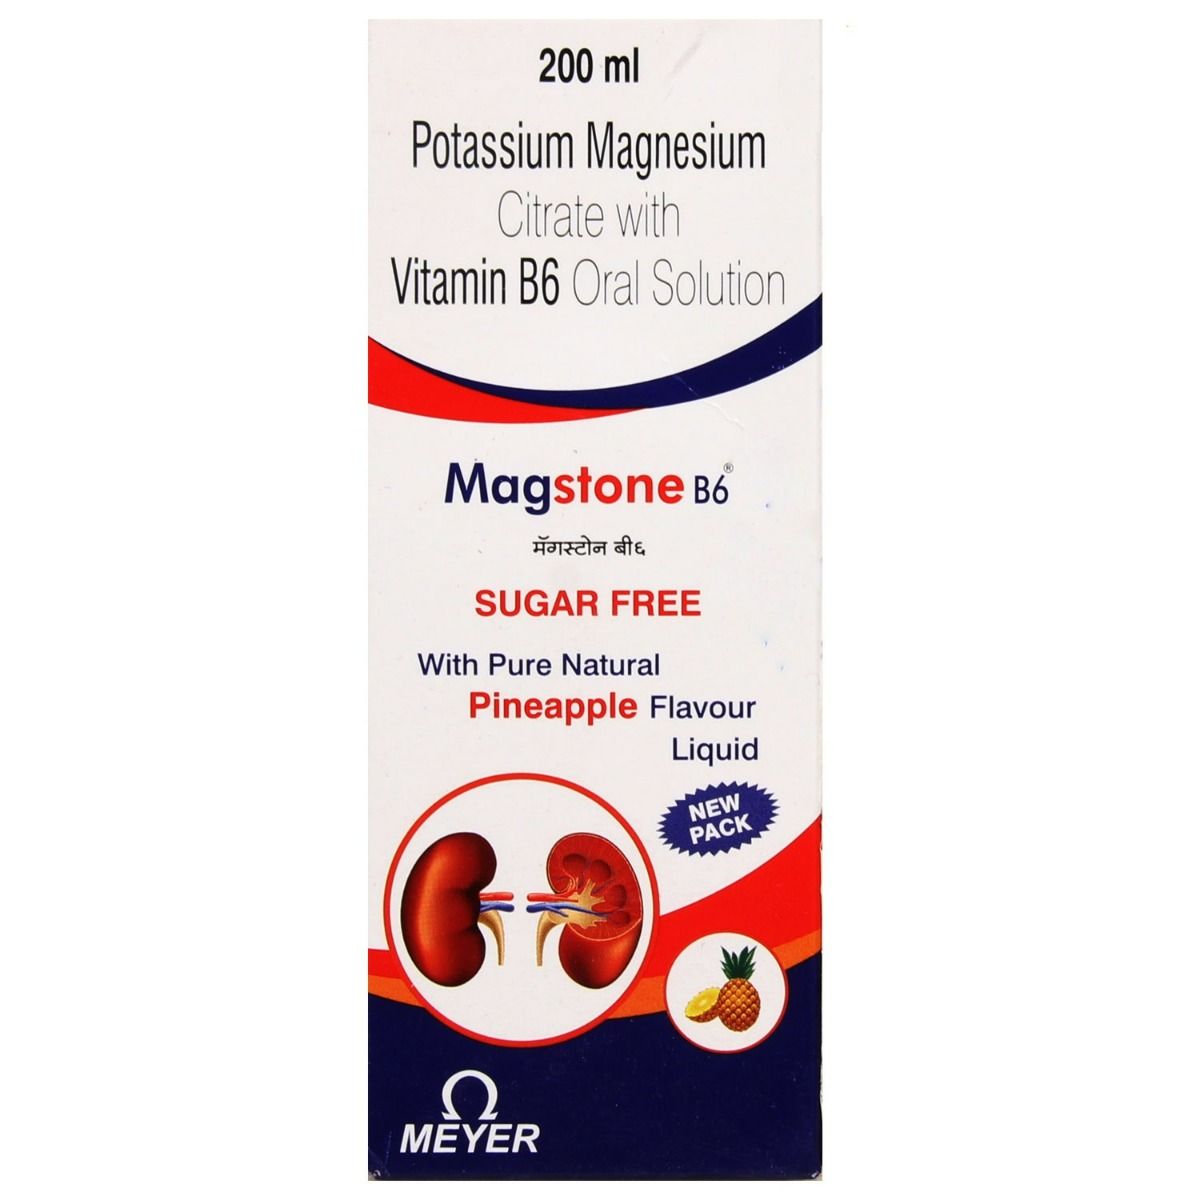 Buy Magstone B6 Oral Solution 200 ml Online